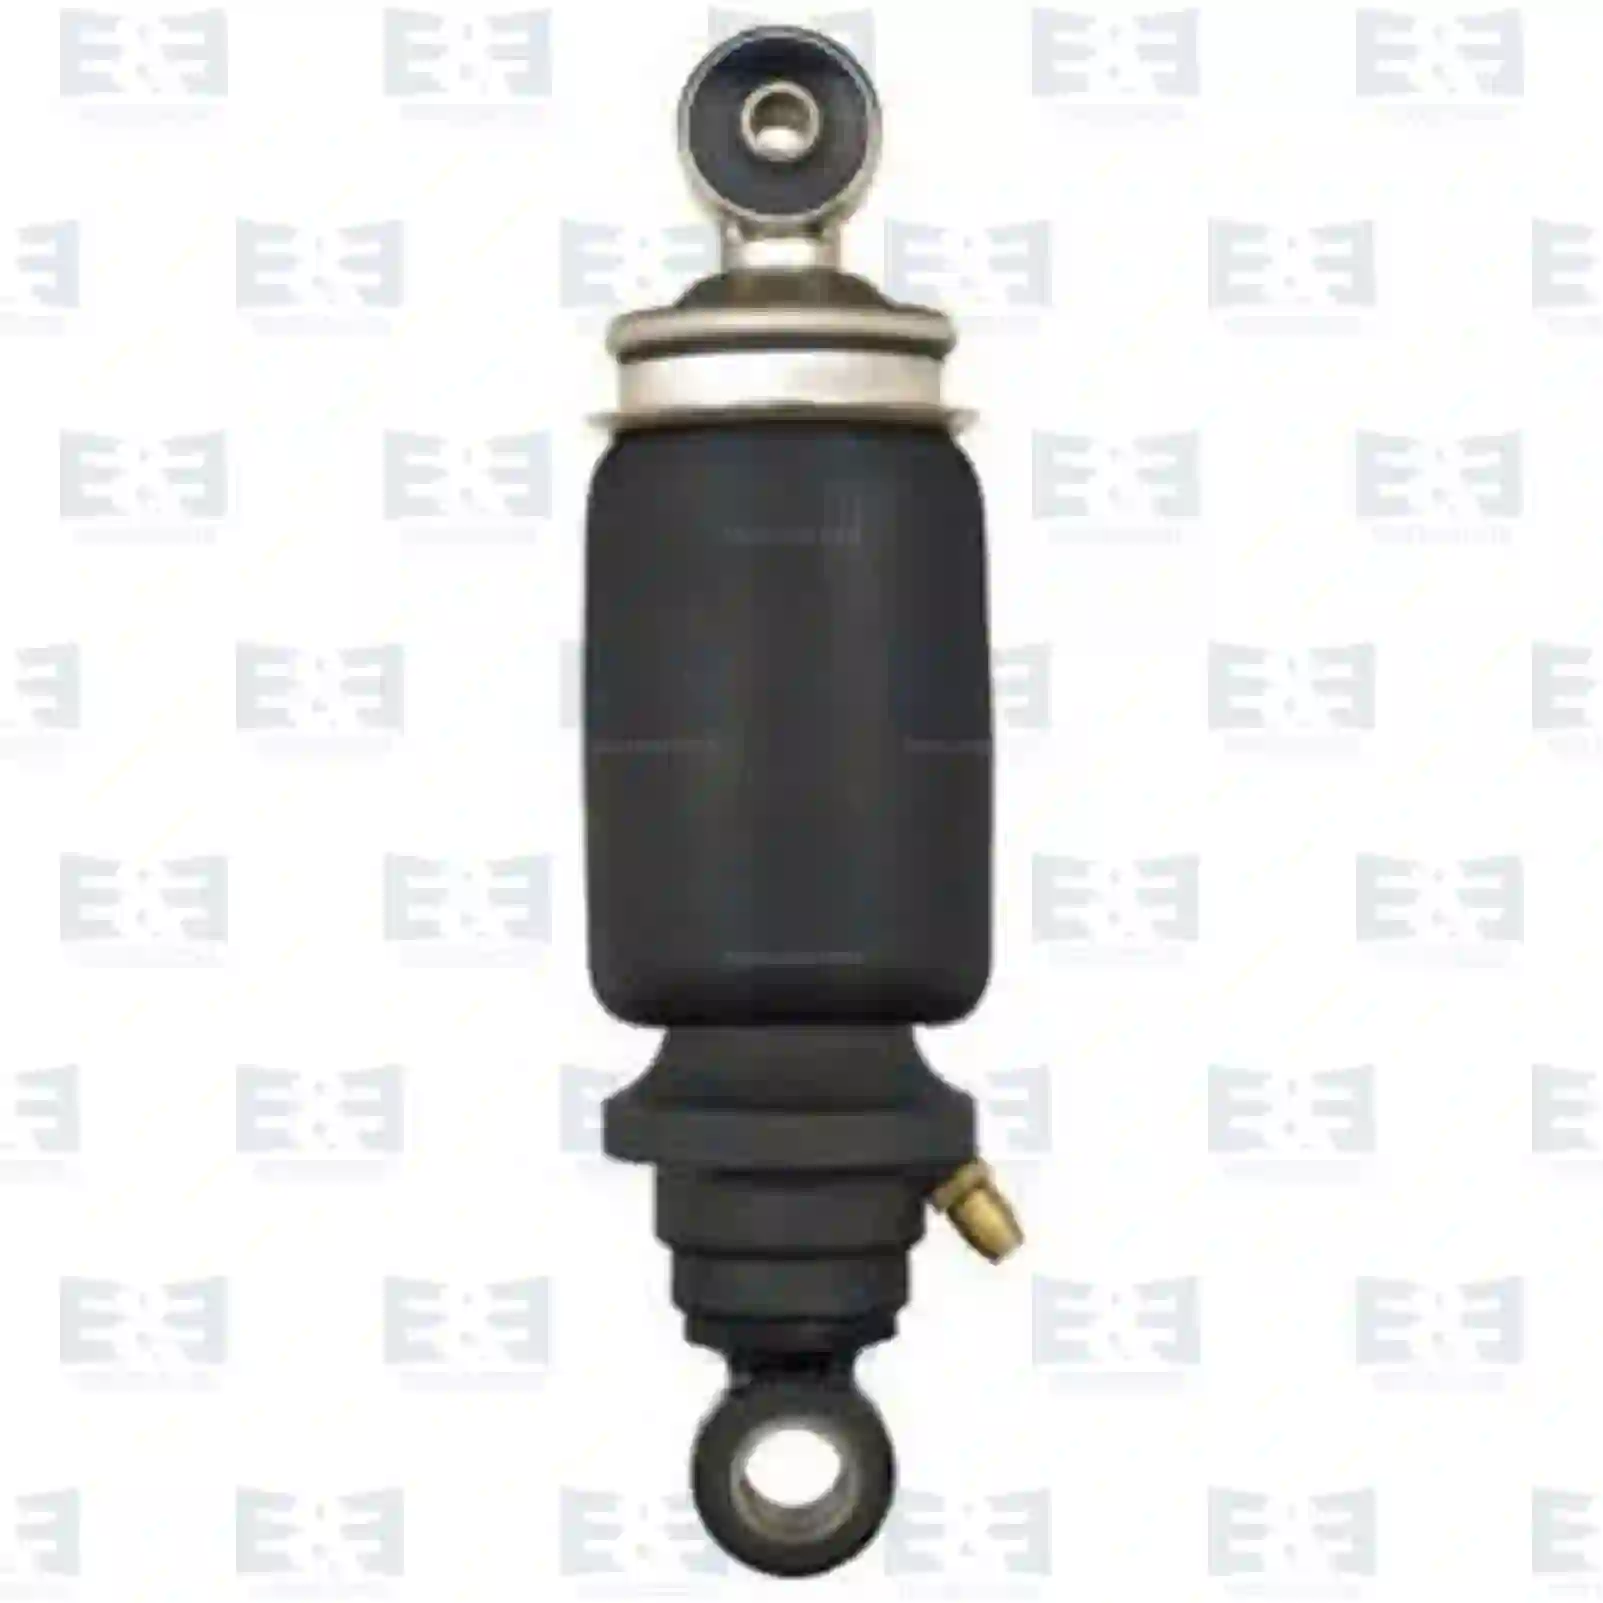 Cabin shock absorber, with air bellow, 2E2276241, 9428907019 ||  2E2276241 E&E Truck Spare Parts | Truck Spare Parts, Auotomotive Spare Parts Cabin shock absorber, with air bellow, 2E2276241, 9428907019 ||  2E2276241 E&E Truck Spare Parts | Truck Spare Parts, Auotomotive Spare Parts